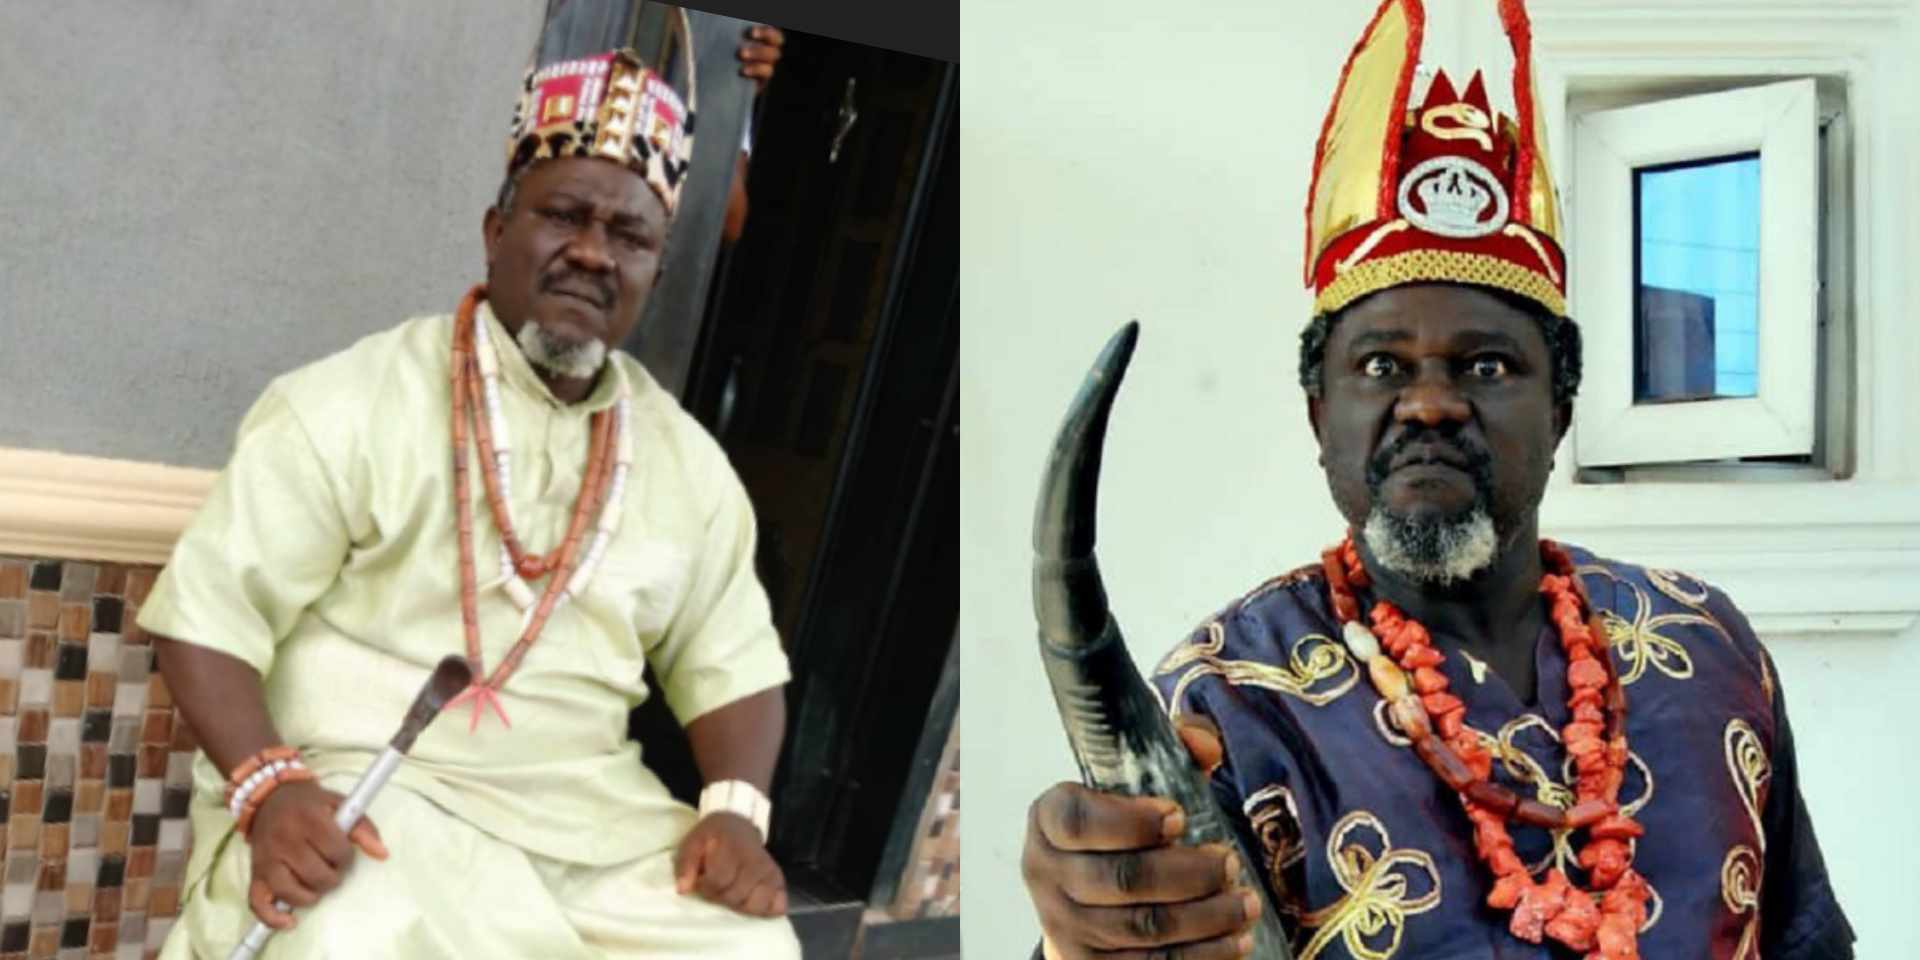 Nollywood mourns as veteran actor, David Osagie dies hours after movie set